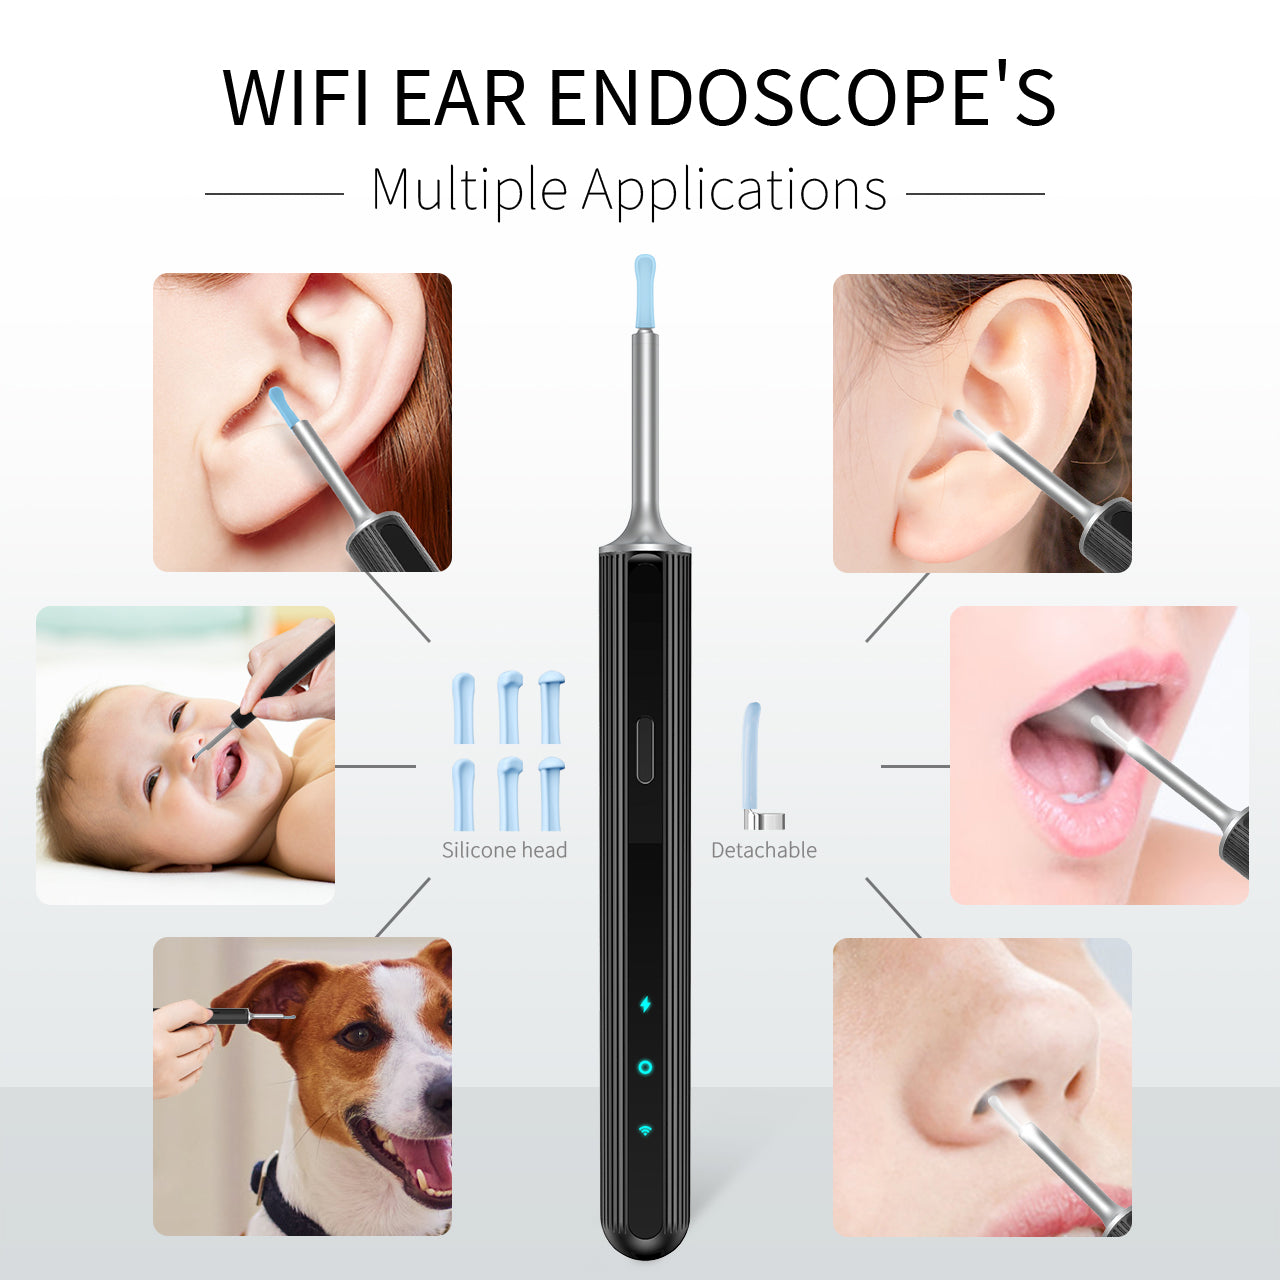 Ear Wax Removal Ear Wax Camera 1080P FHD Earwax Cleaner Set Wireless Ear Wax Removal Tool with 6 LED Light for Kids, Adults,Pets(New Version)